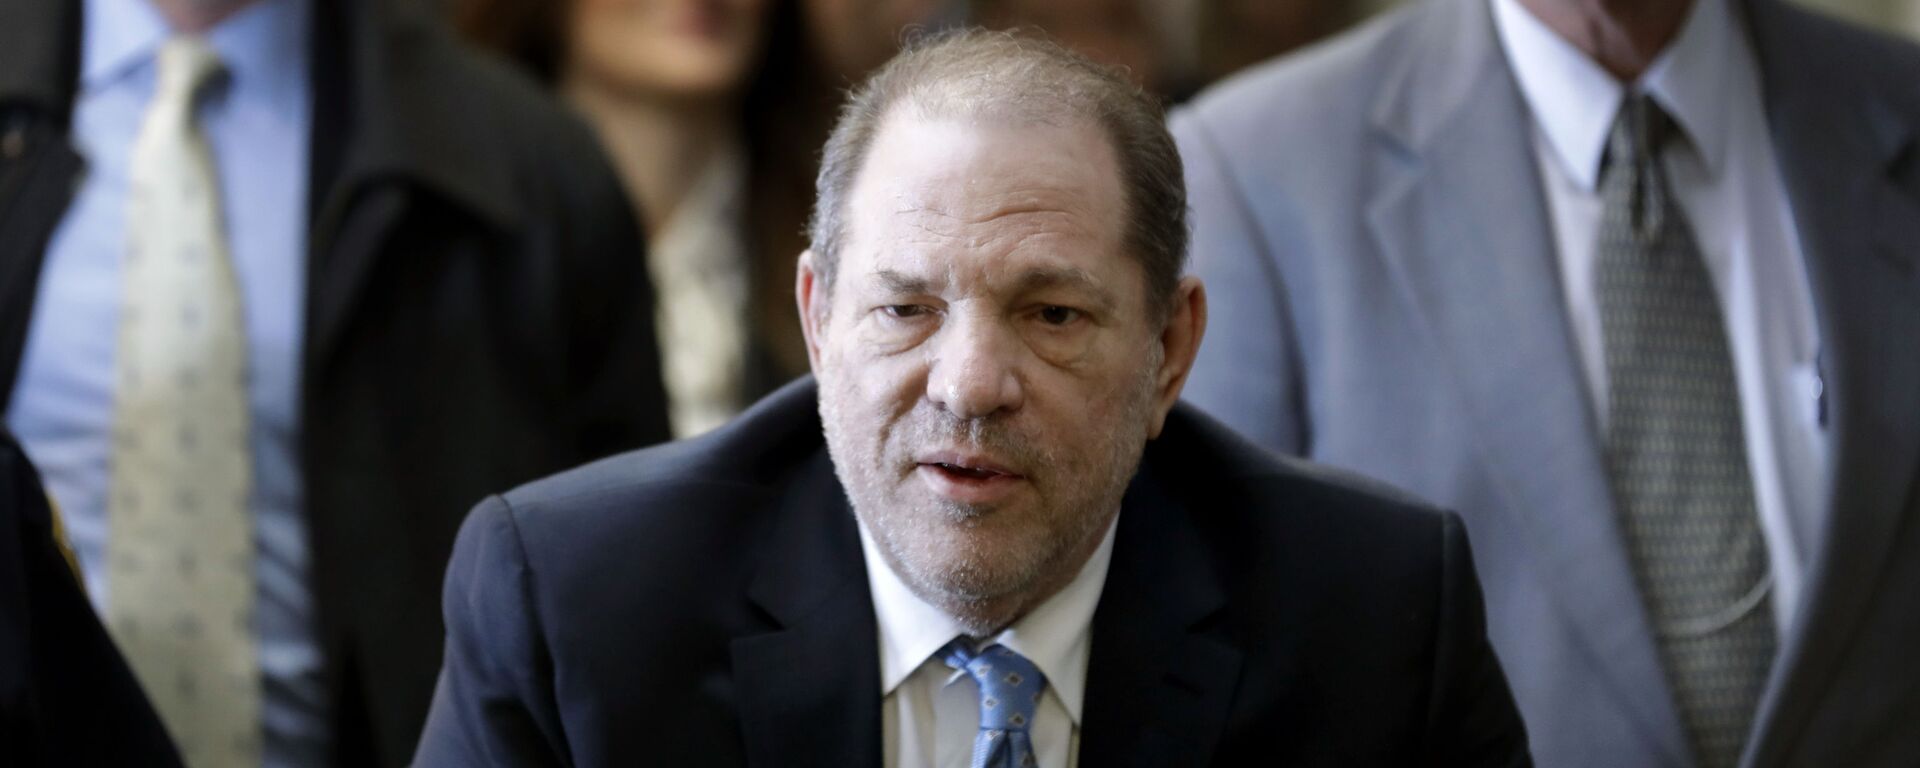 In this 24 February, 2020, file photo, Harvey Weinstein arrives at a Manhattan courthouse as jury deliberations continue in his rape trial in New York. The disgraced Hollywood film mogul and convicted rapist is asking a bankruptcy judge in Delaware to allow him to pursue arbitration in New York over what he claims is his wrongful termination from the company he co-founded. - Sputnik International, 1920, 01.07.2021